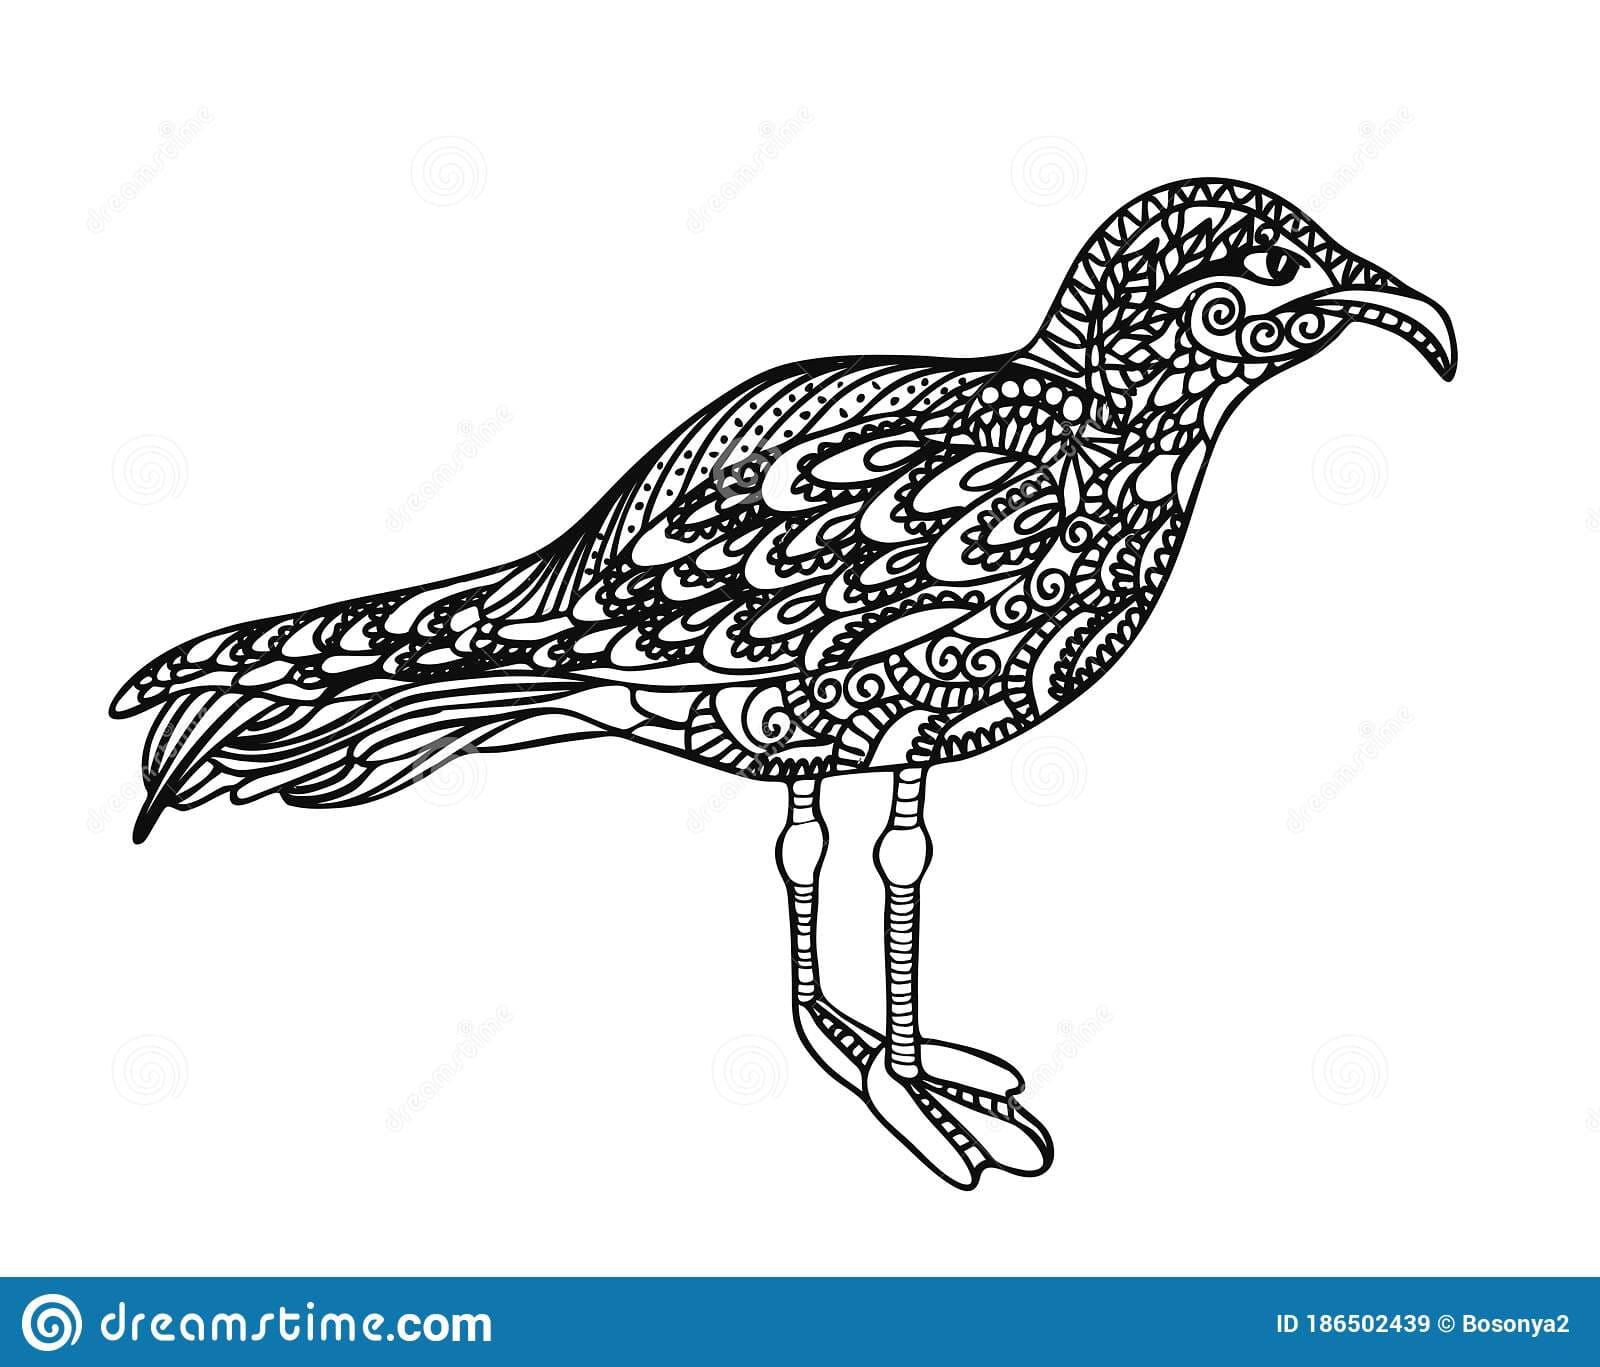 The Bird Is Black And White Image Coloring Page